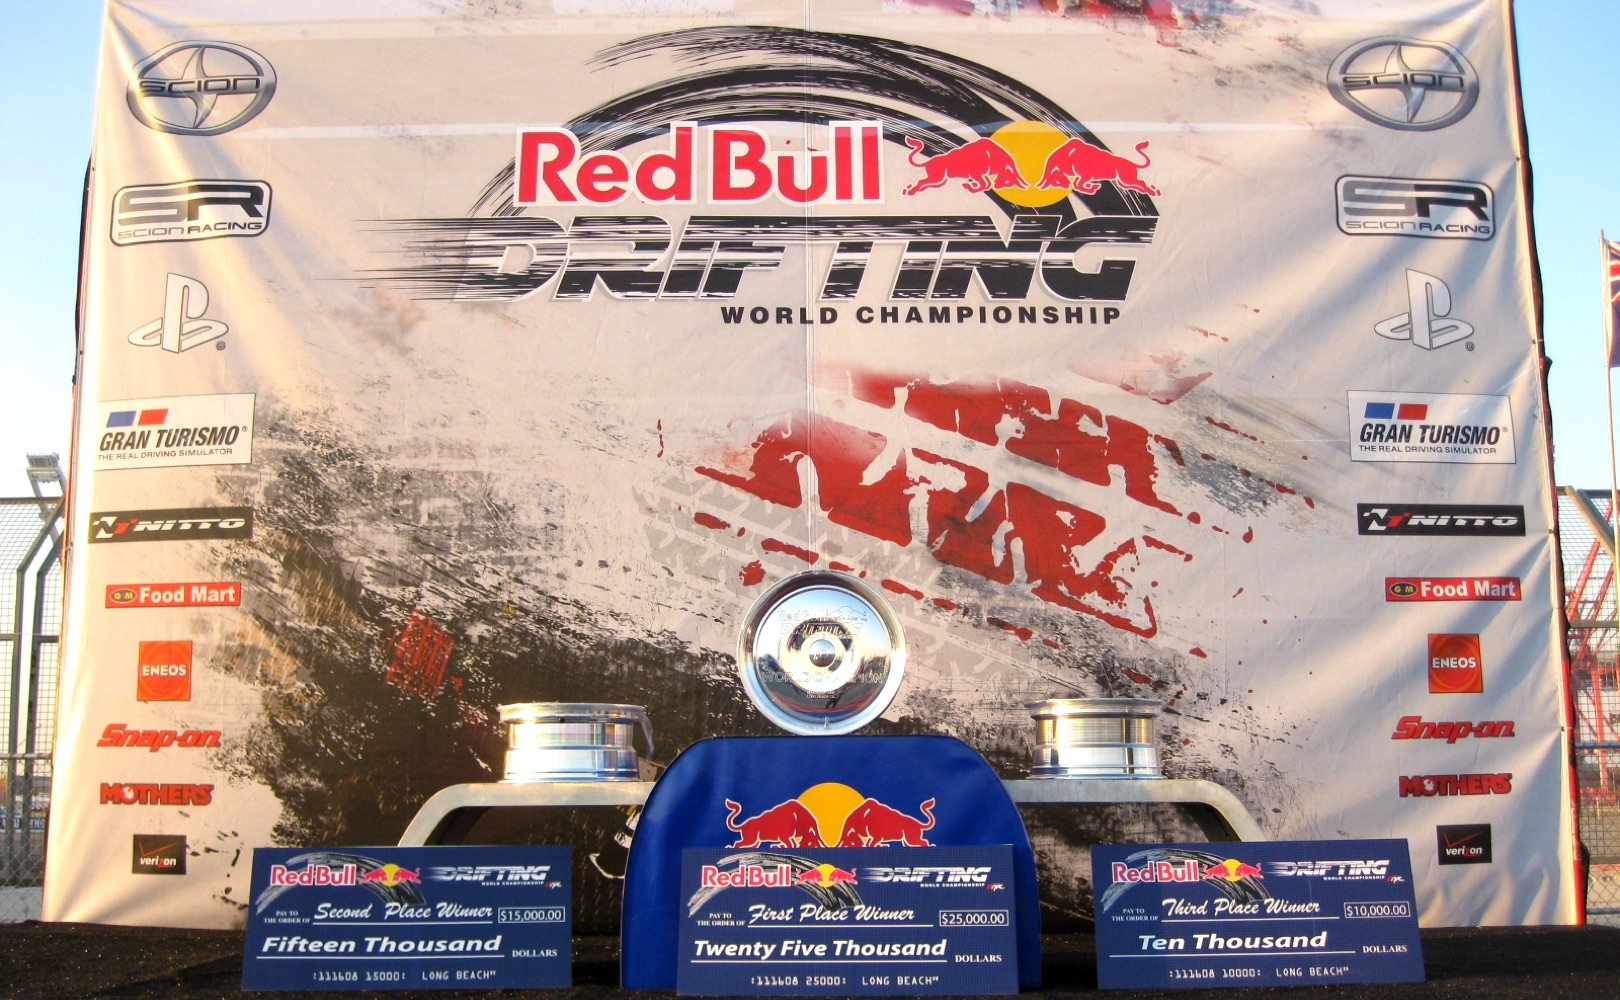 redbull drifting branding outdoor event promotional signage 3